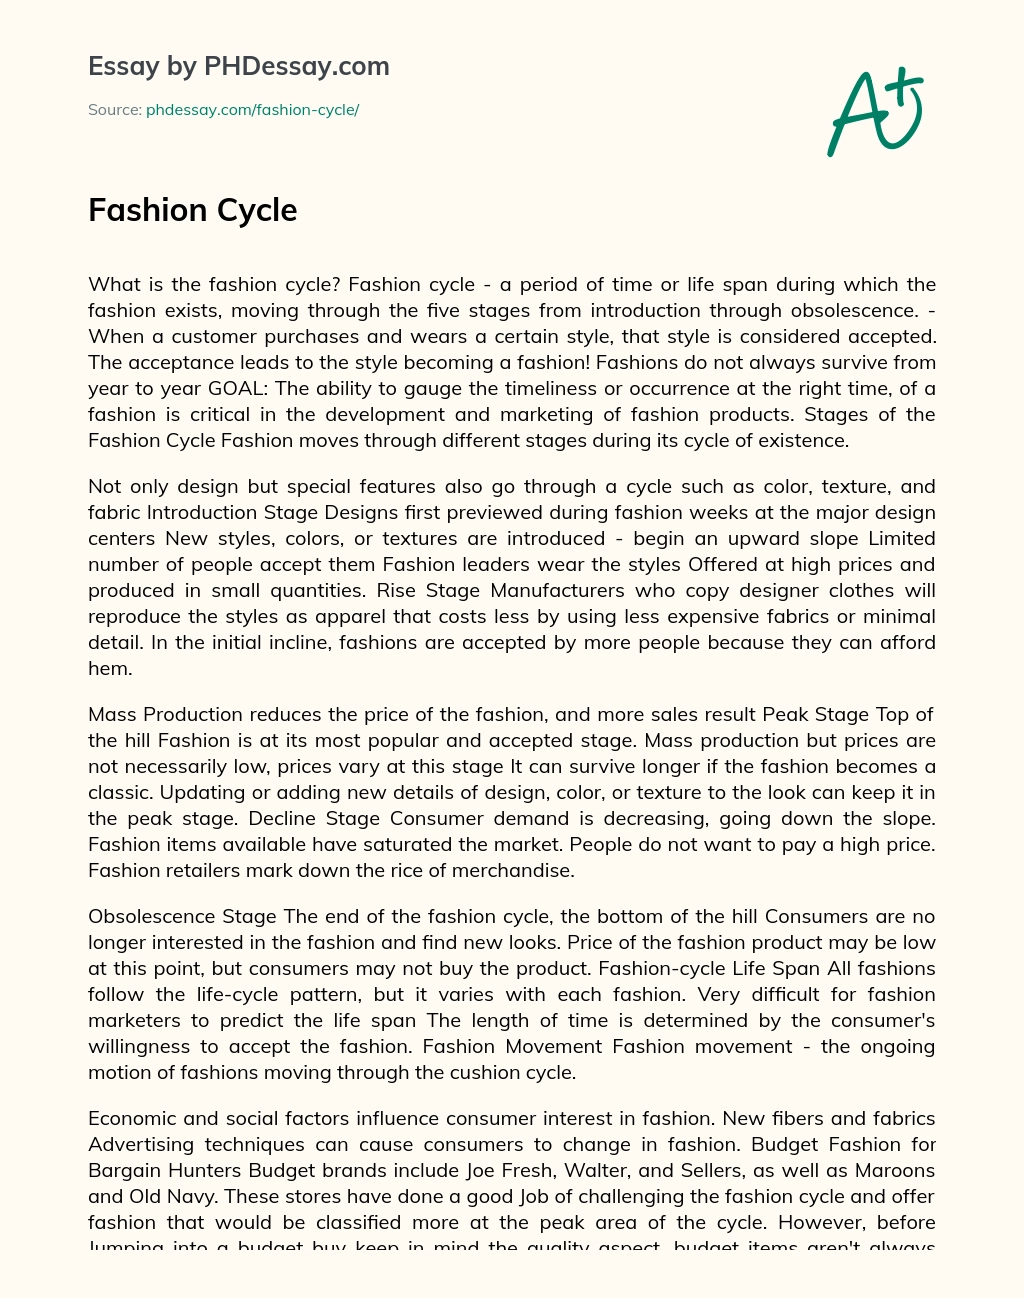 Understanding the Fashion Cycle: Introduction, Rise, Peak, Decline, and Obsolescence essay